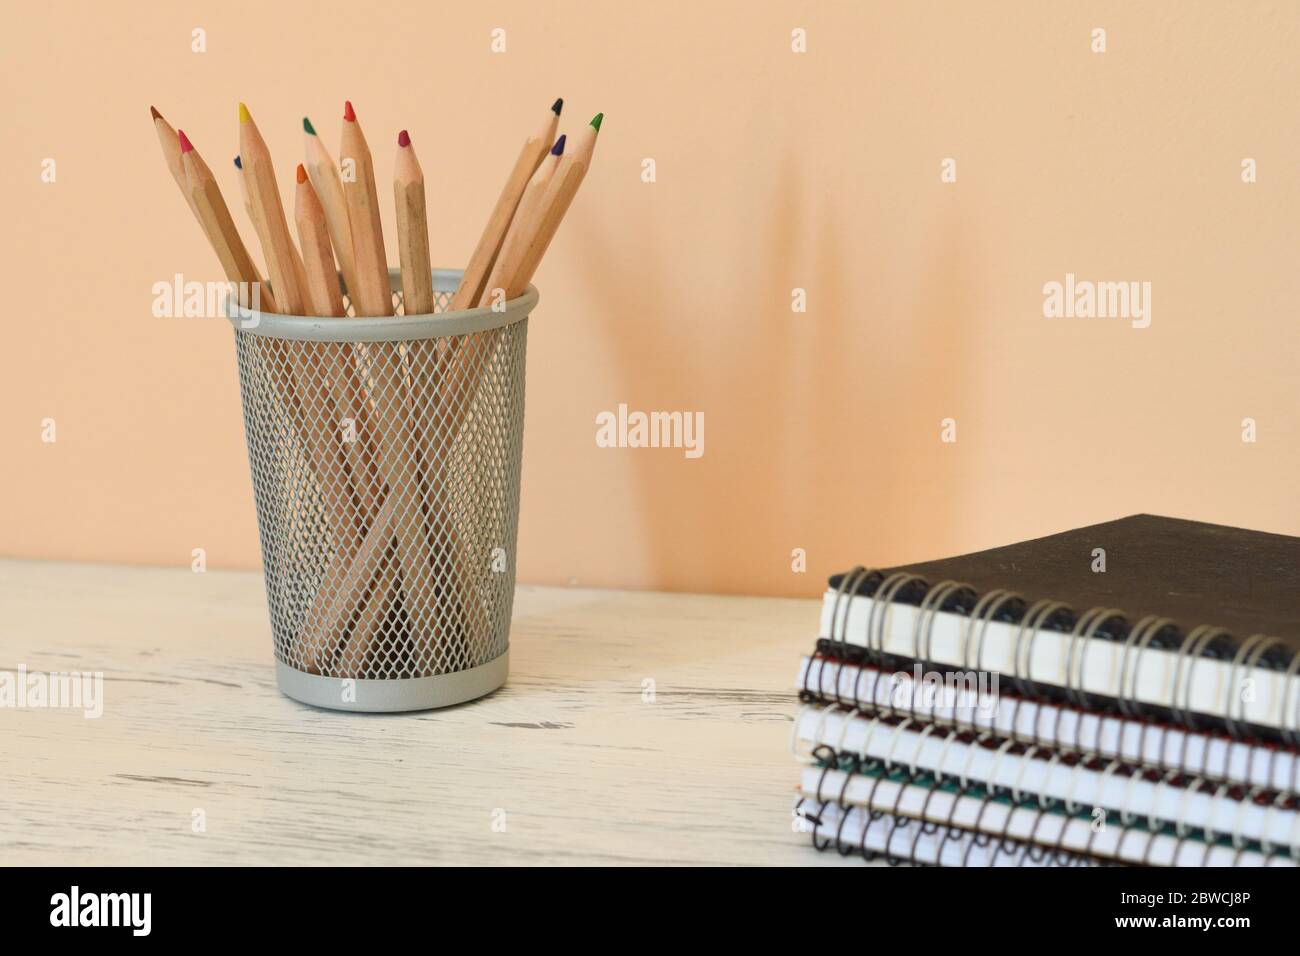 Pencil pot and a stack of notebooks Stock Photo